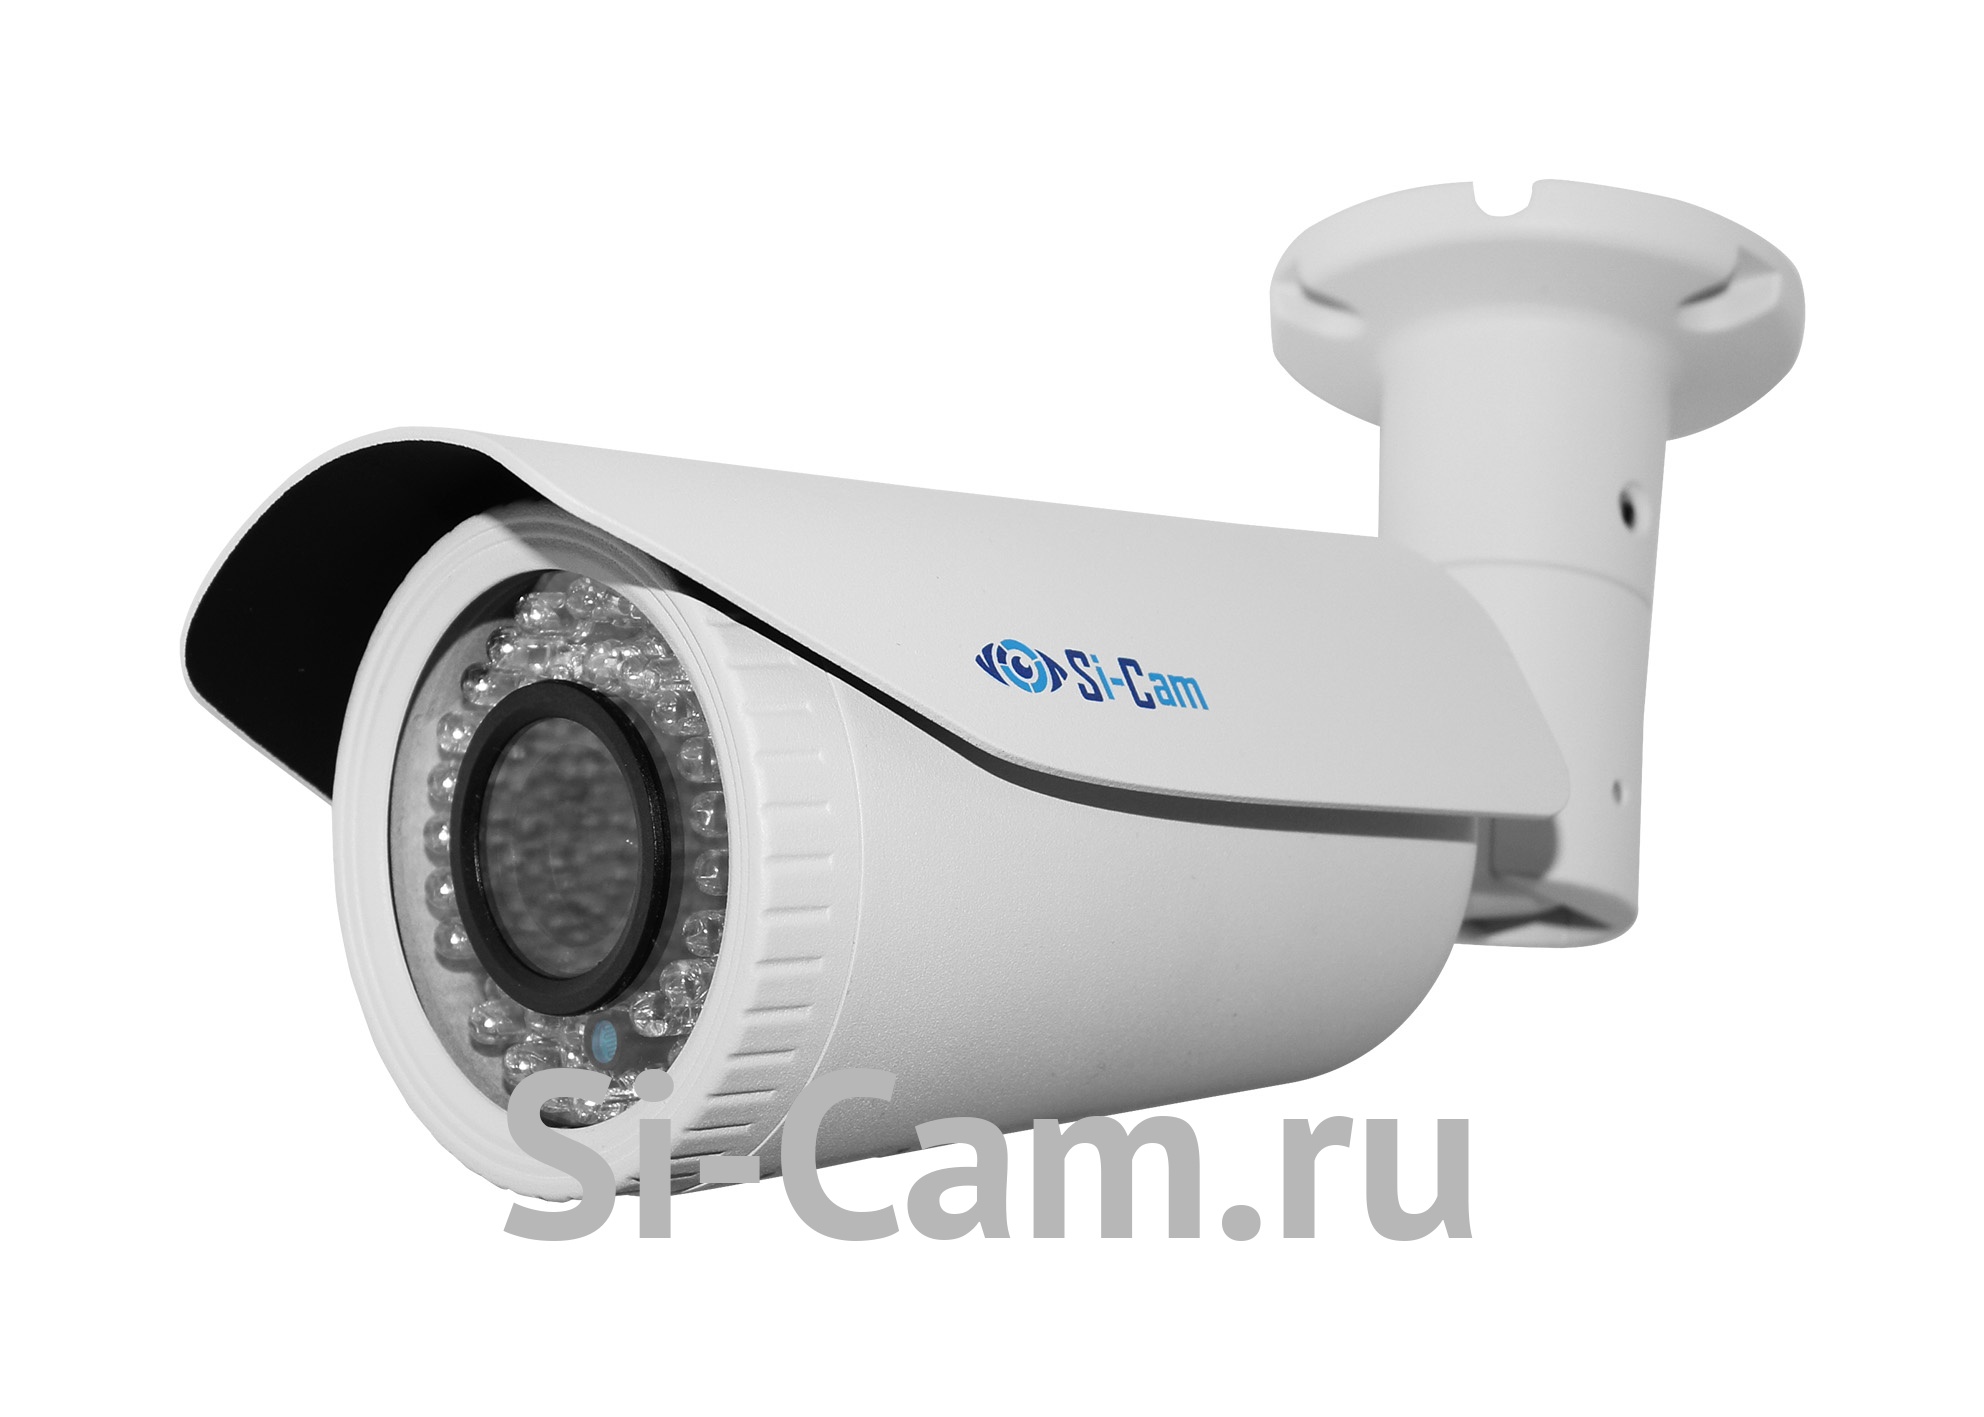 Si-Cam SC-DSW301V IR   IP   (3Mpx, 2304*1296, 25/, FULL COLOR, WDR/HDR)